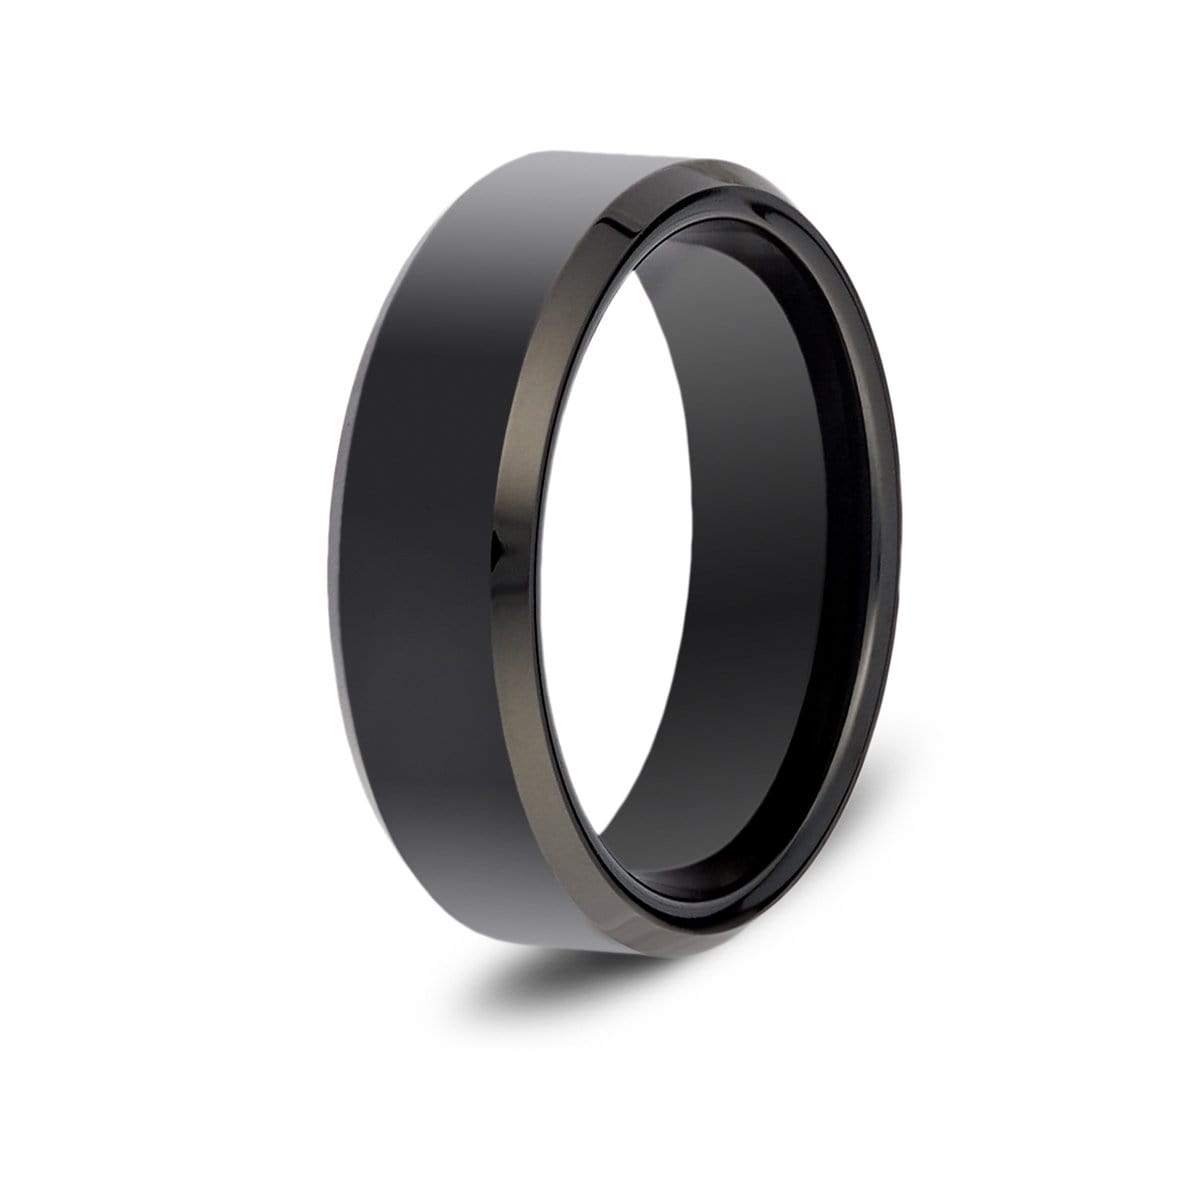 MEENAZ black rings for boys men finger rings gents ring stylish party  simple design AD Stainless Steel, Alloy, Metal, Zinc, Steel, Stone Diamond,  Cubic Zirconia Titanium, Black Silver Plated Ring Price in